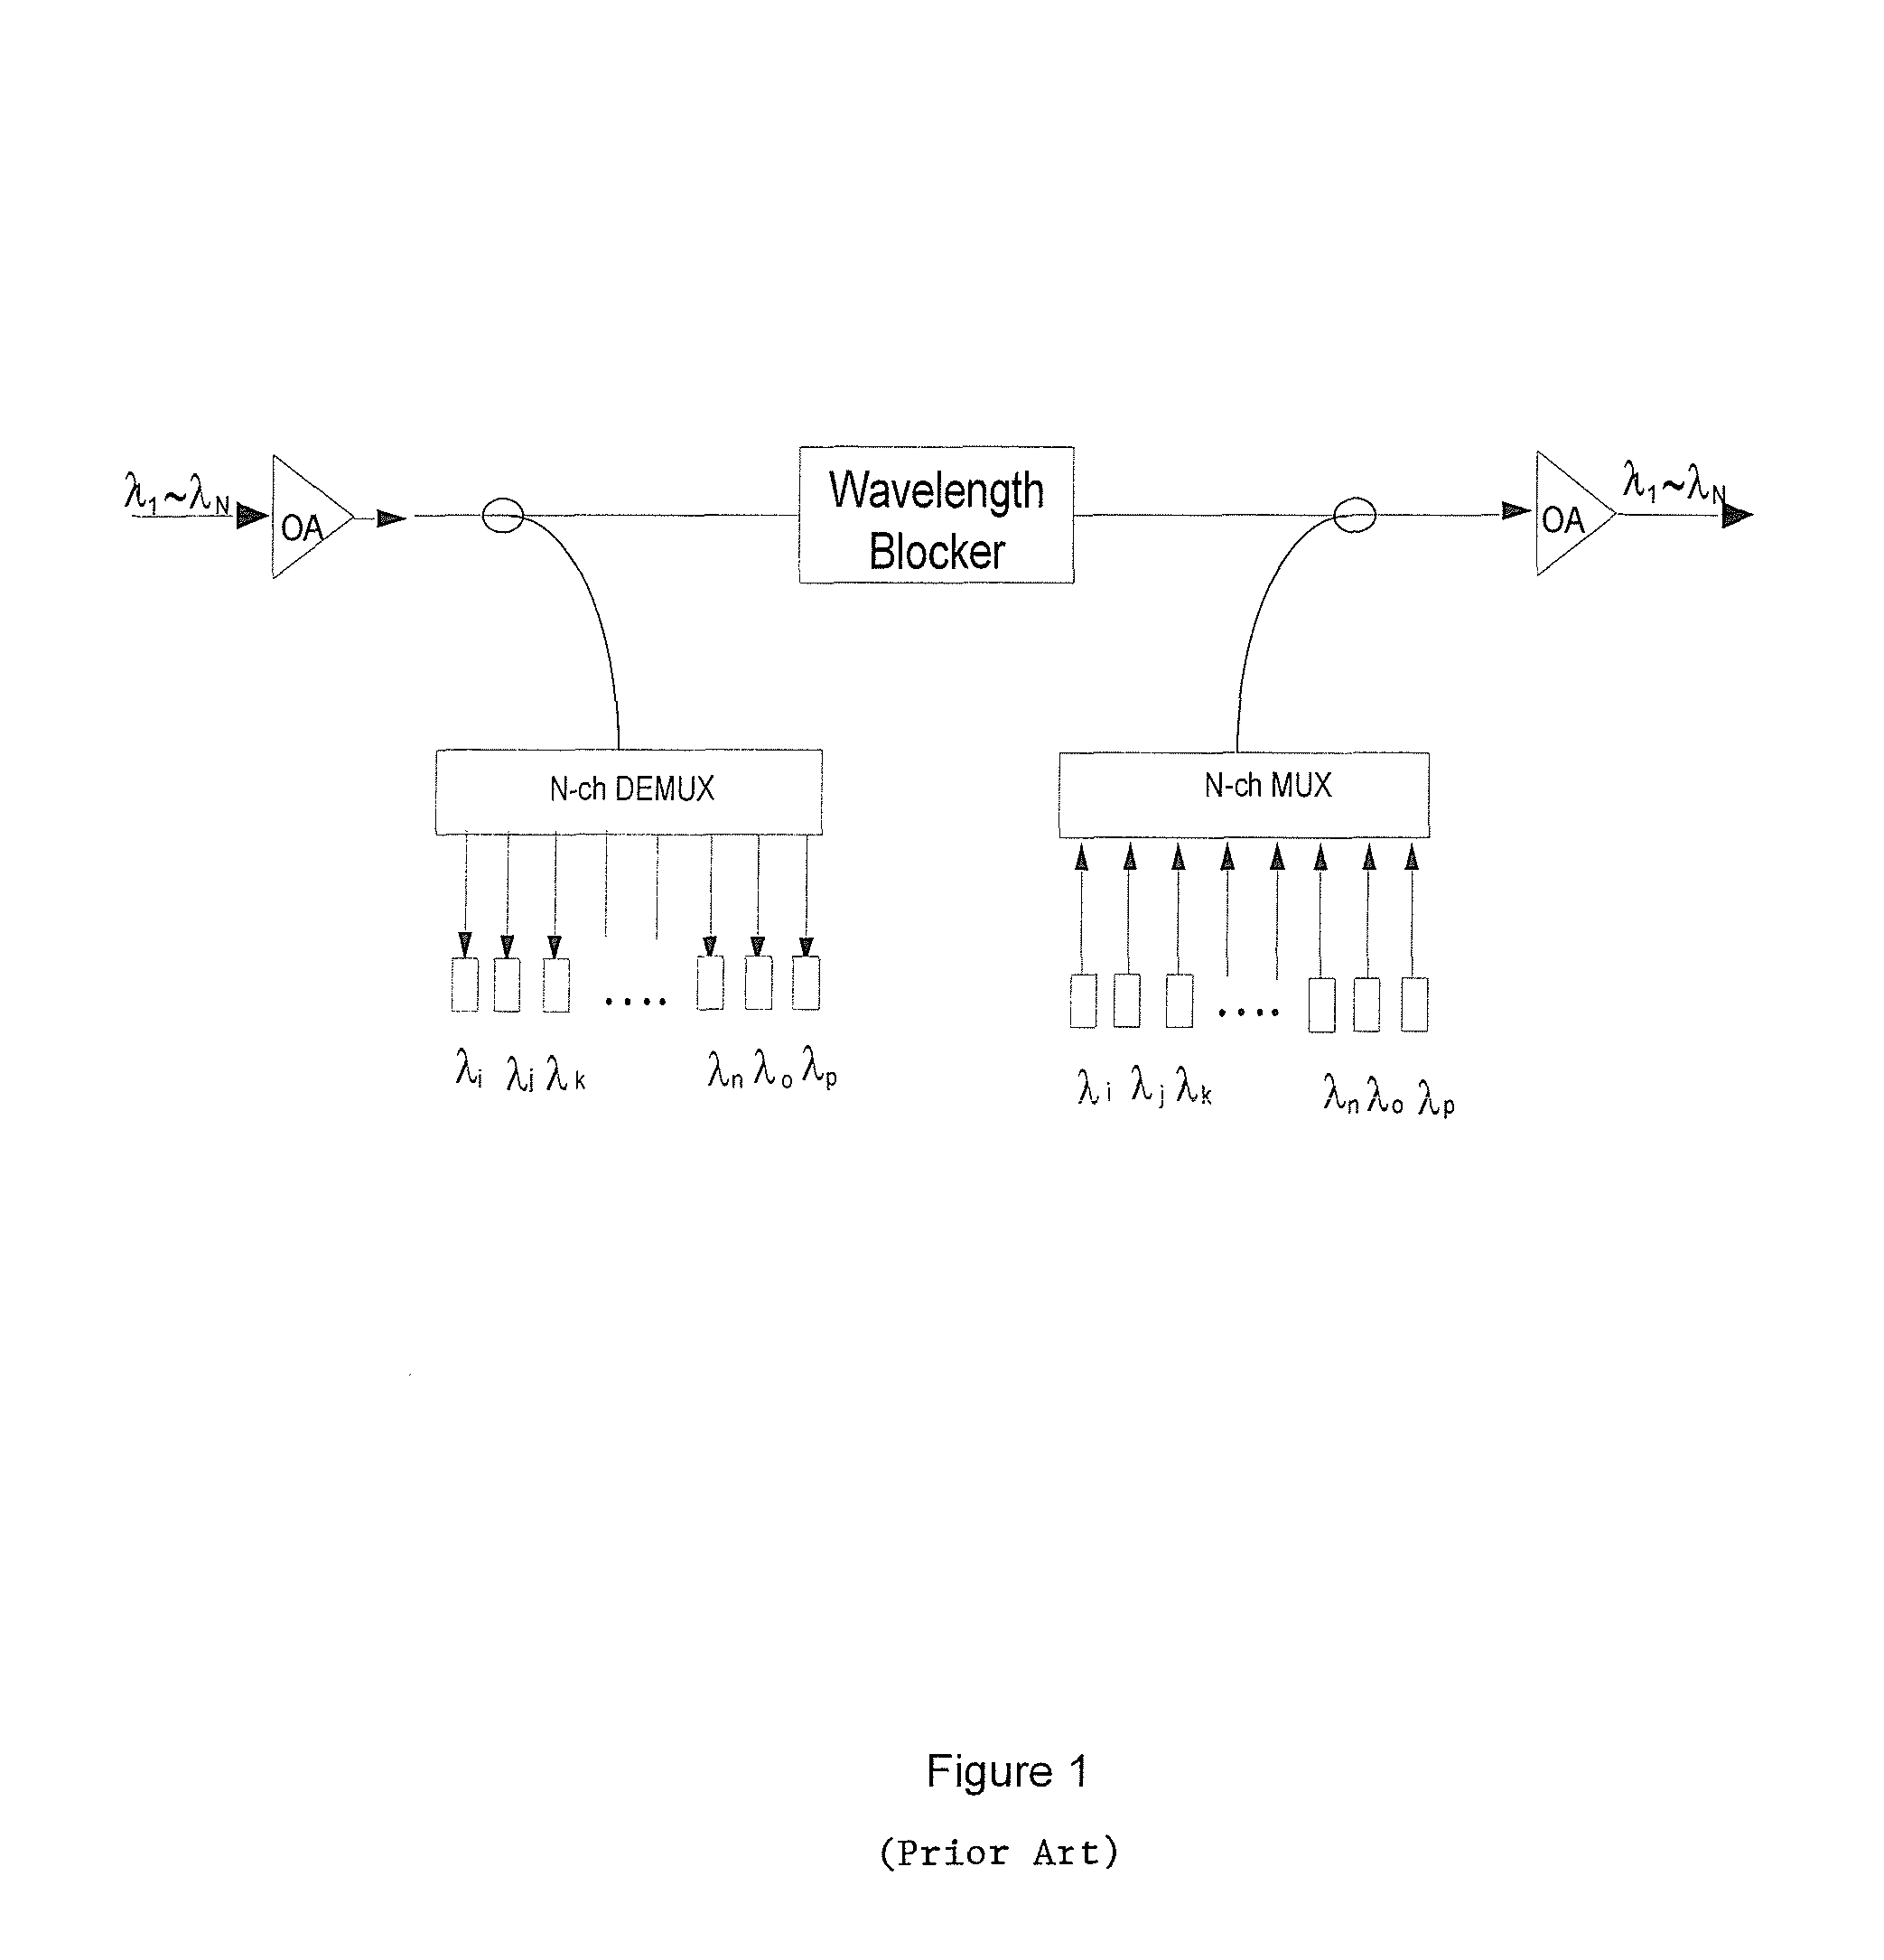 Method and system for band blocking in an optical telecommunication network